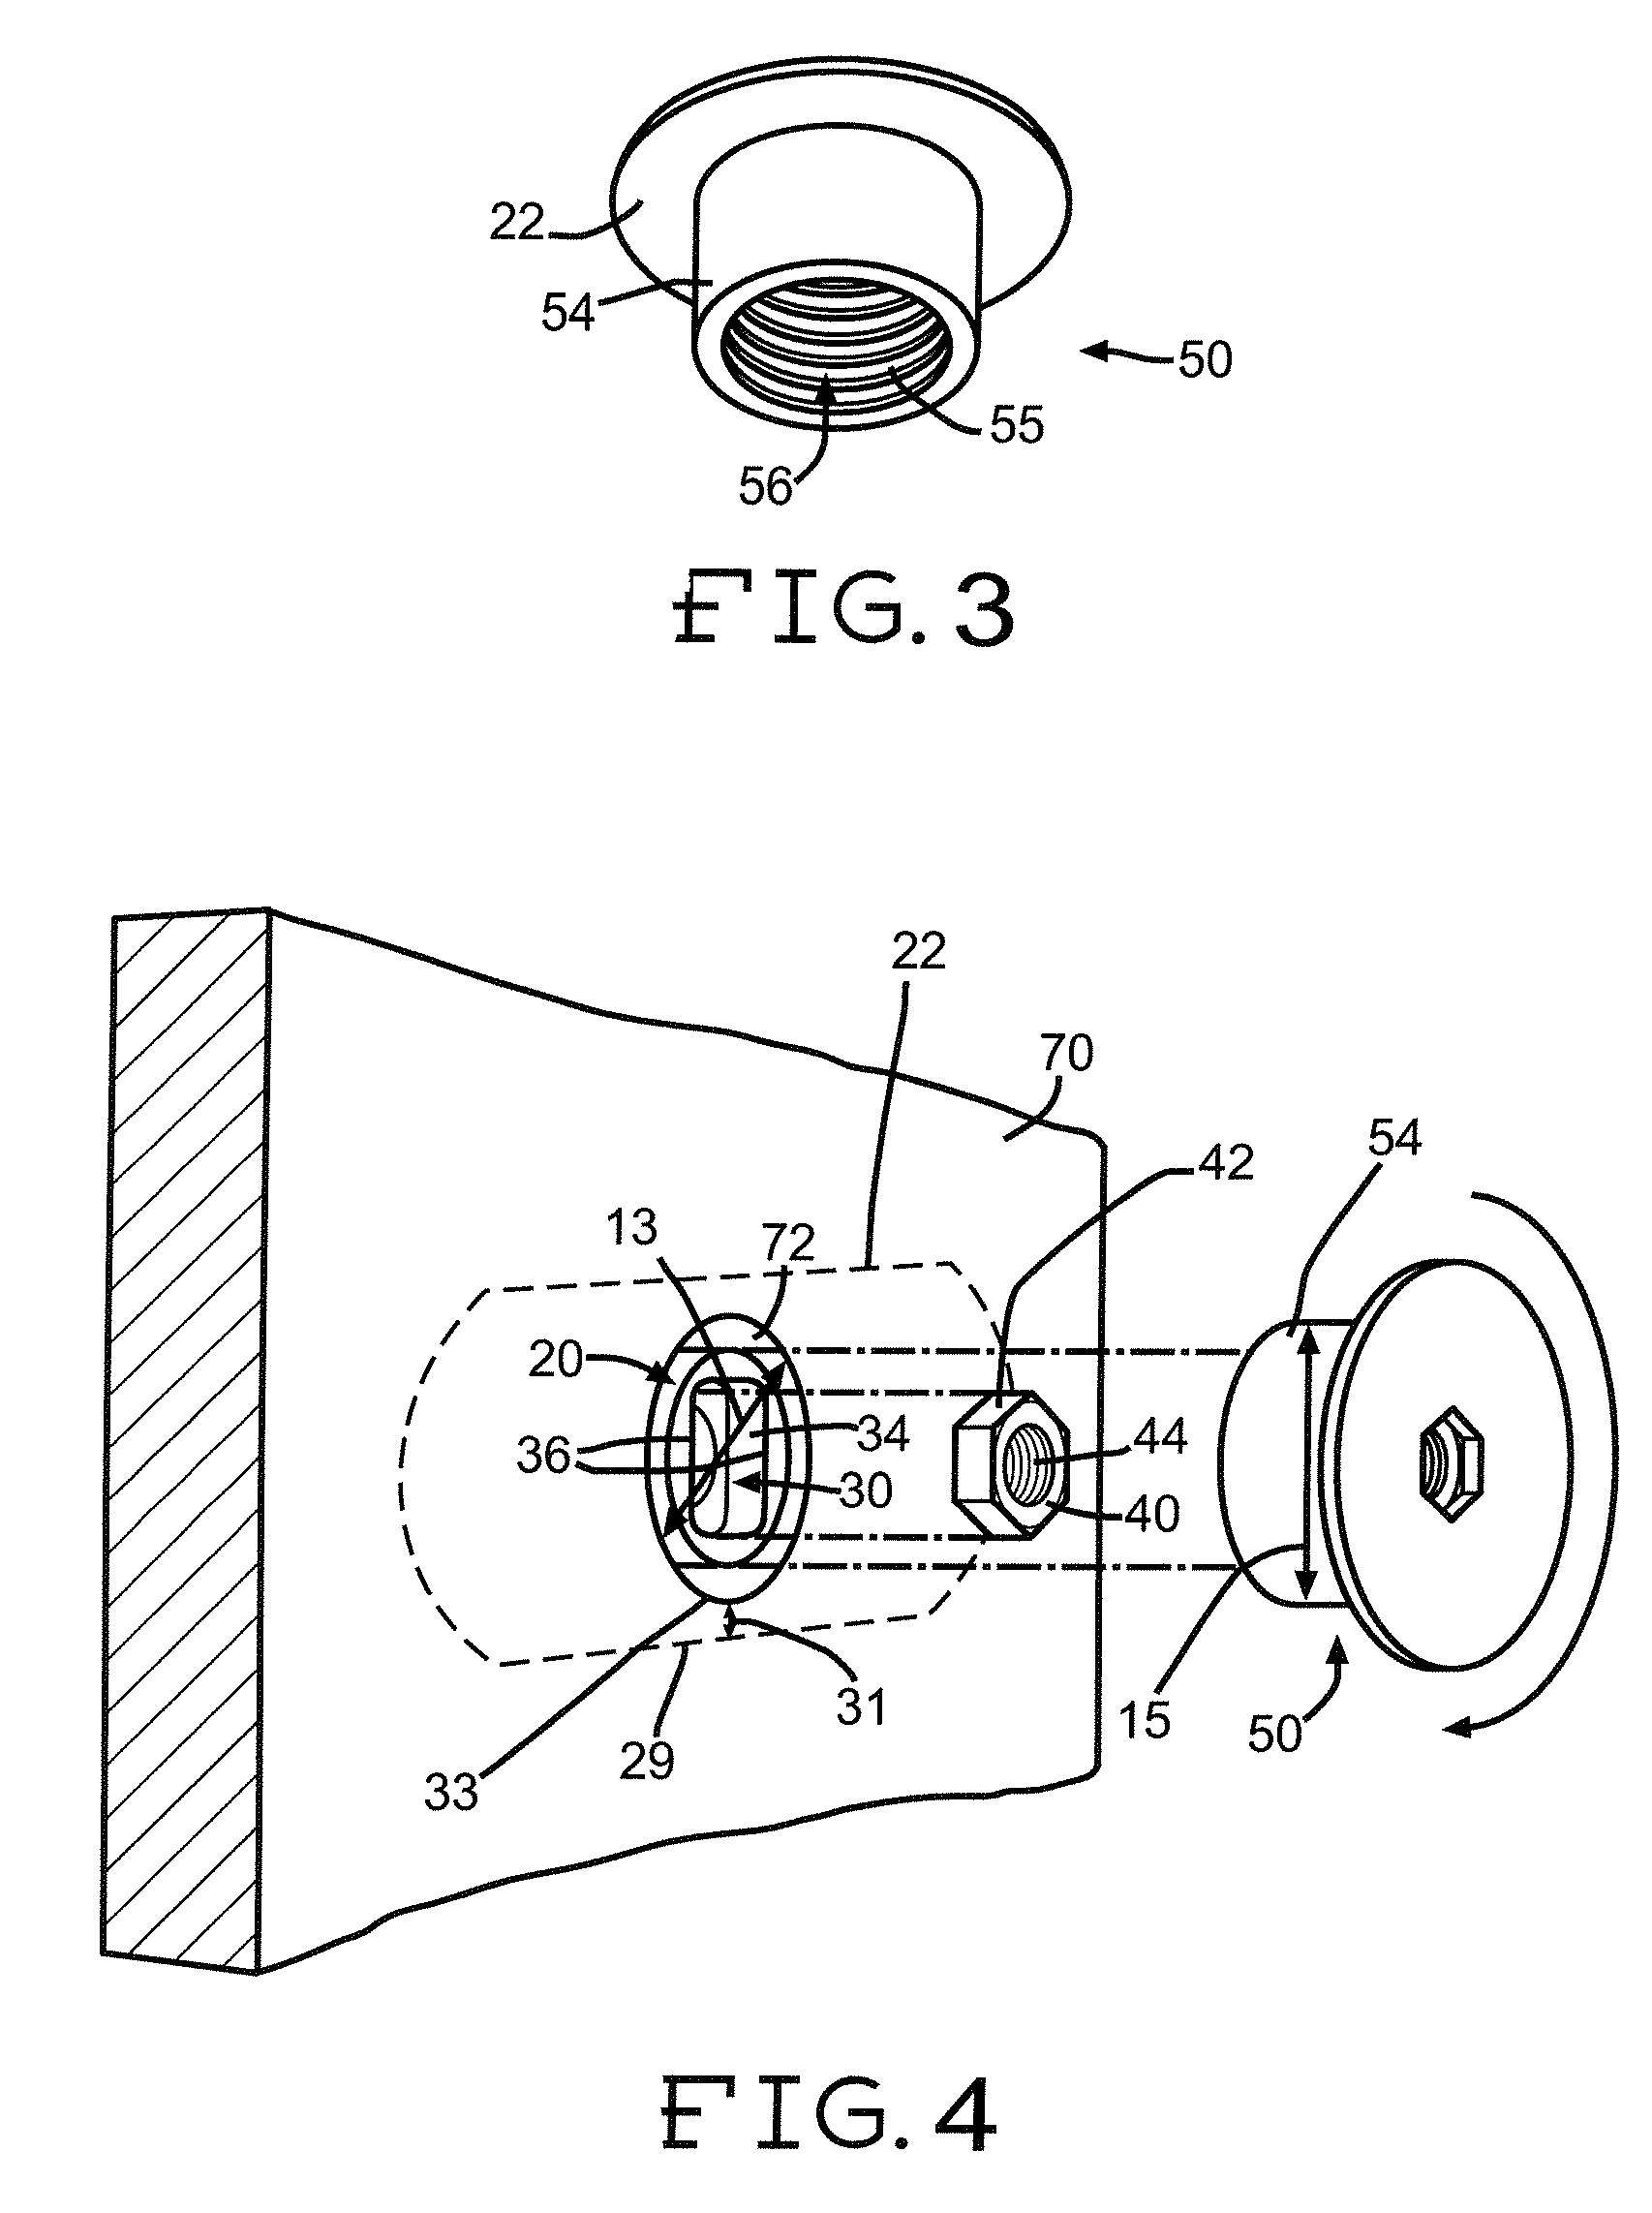 Ballistic resistant through insert with floating capability for stopping a ballistic projectile